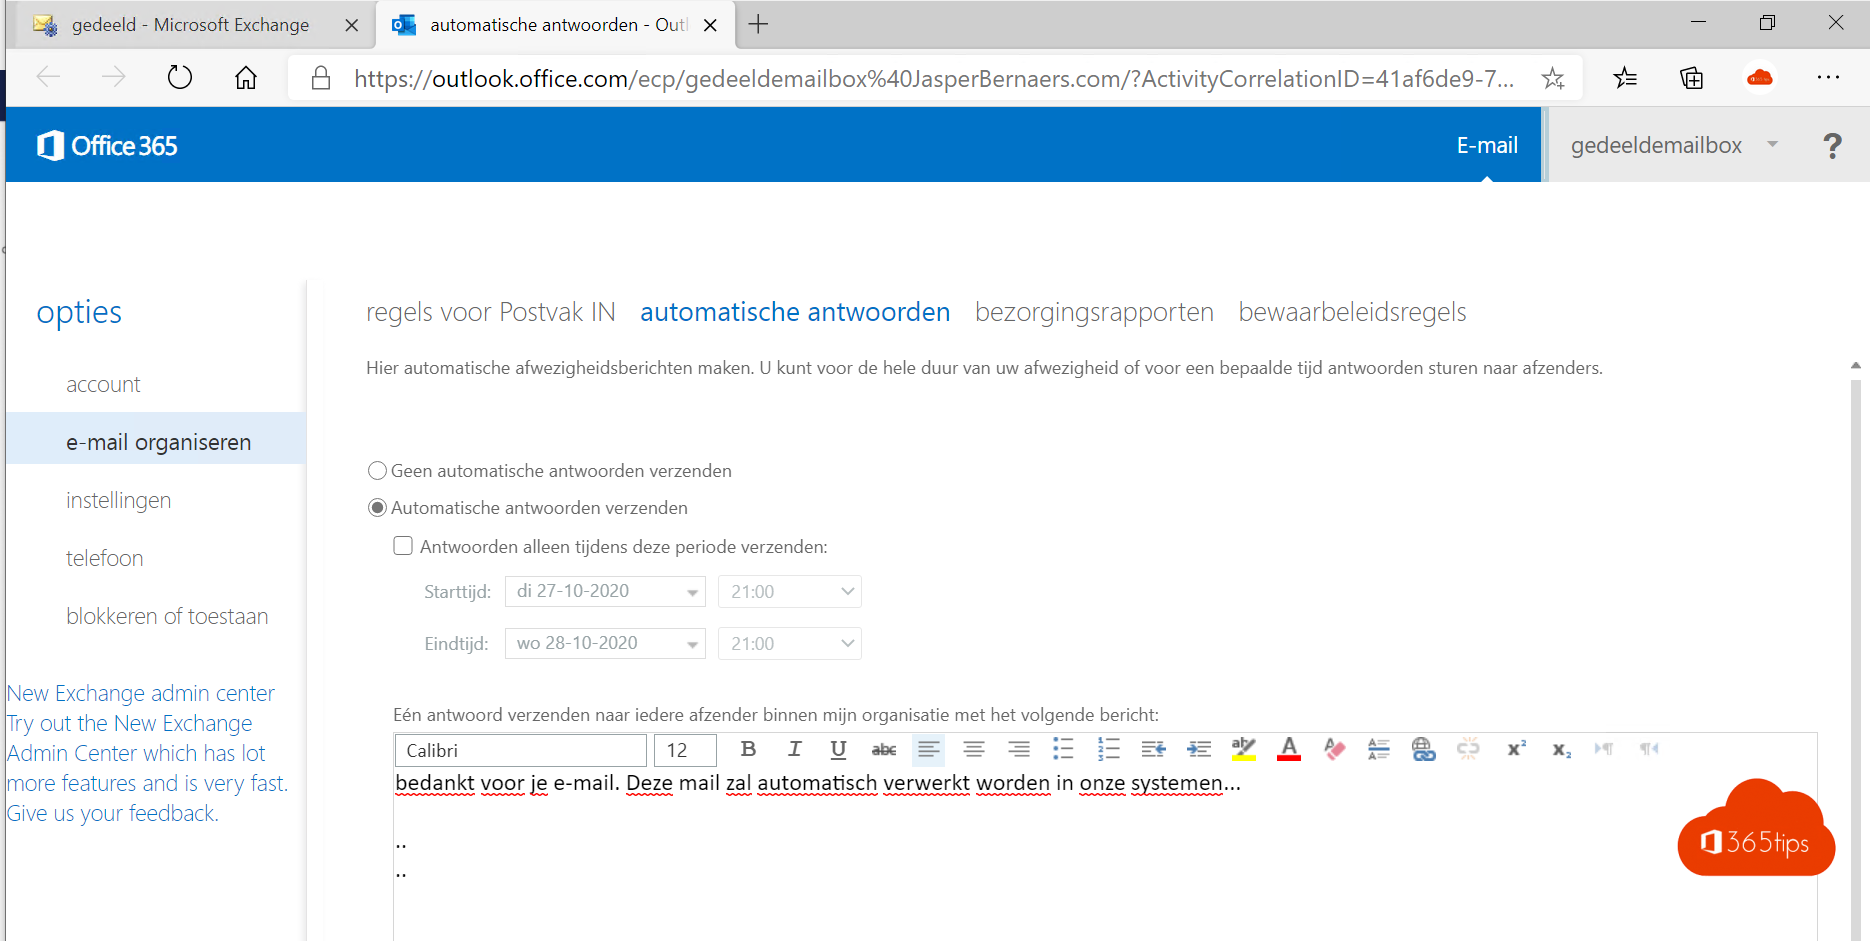 How can you set up an Out-Of-Office on a Office 365 shared mailbox?